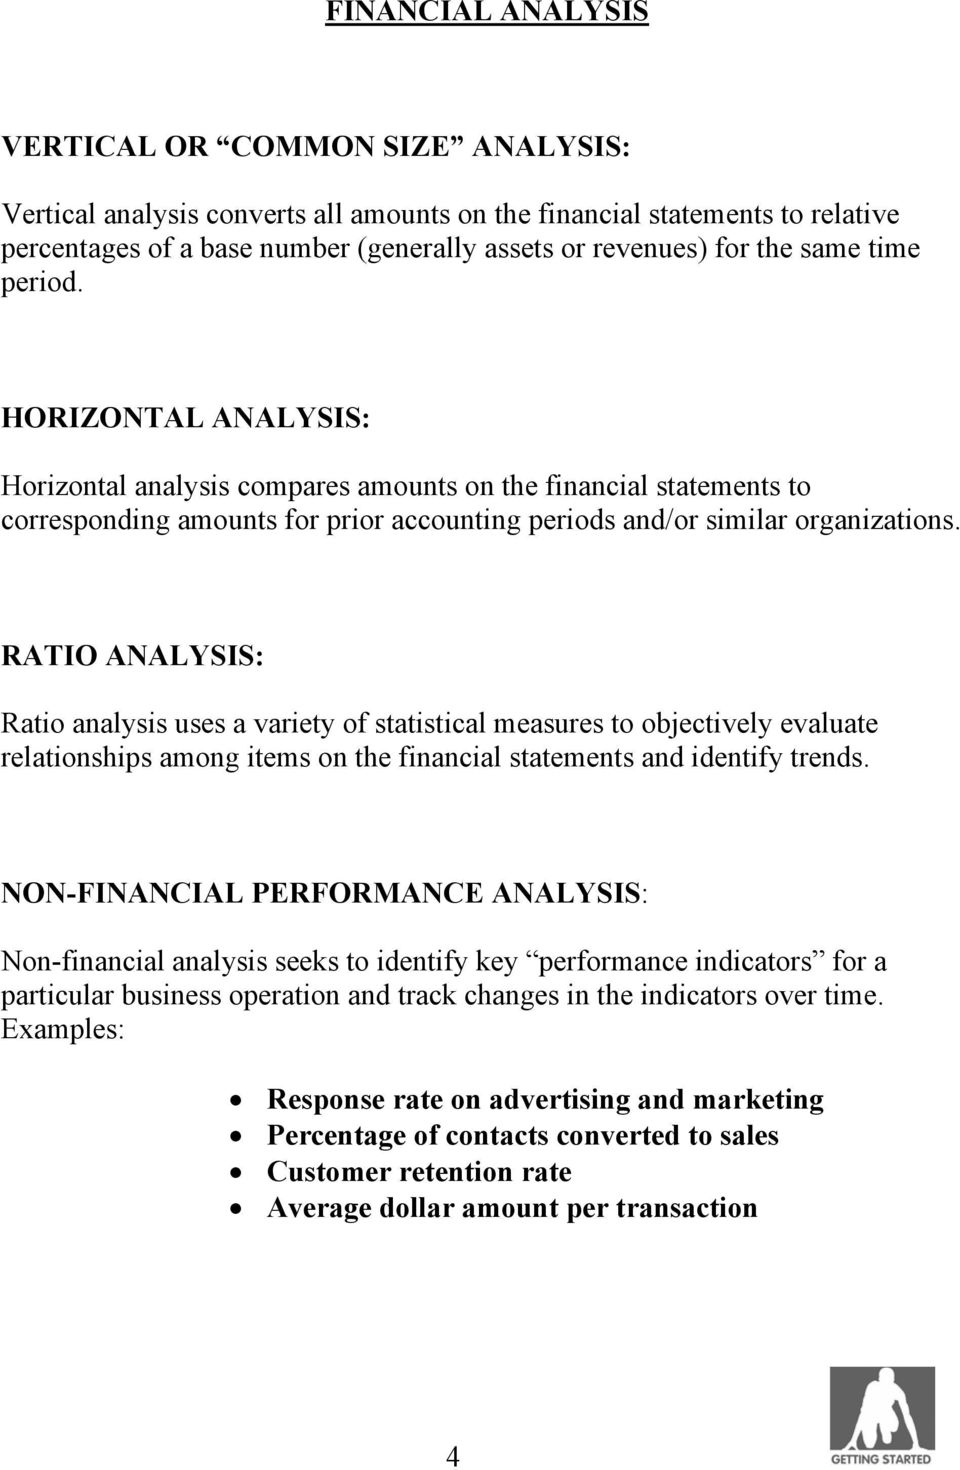 RATIO ANALYSIS: Ratio analysis uses a variety of statistical measures to objectively evaluate relationships among items on the financial statements and identify trends.